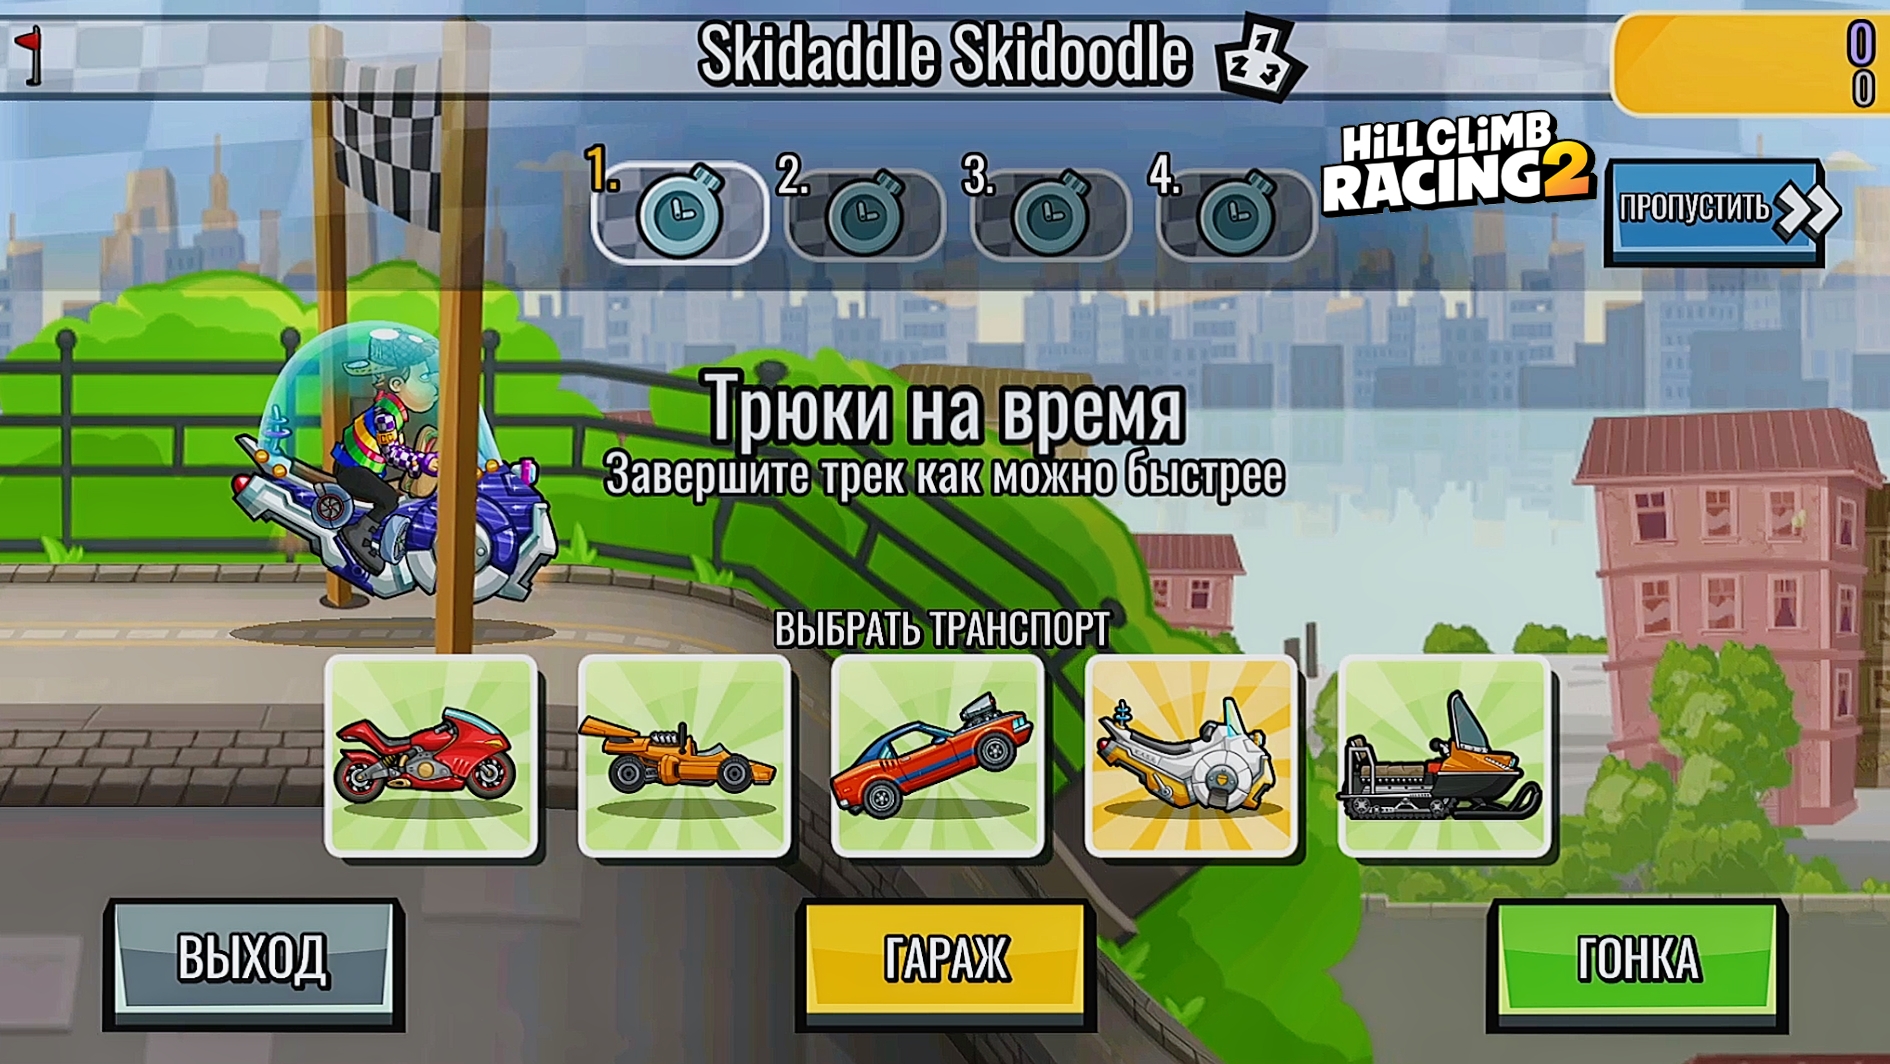 NEW TEAM EVENT Skidaddle Skidoodle - Hill Climb Racing 2